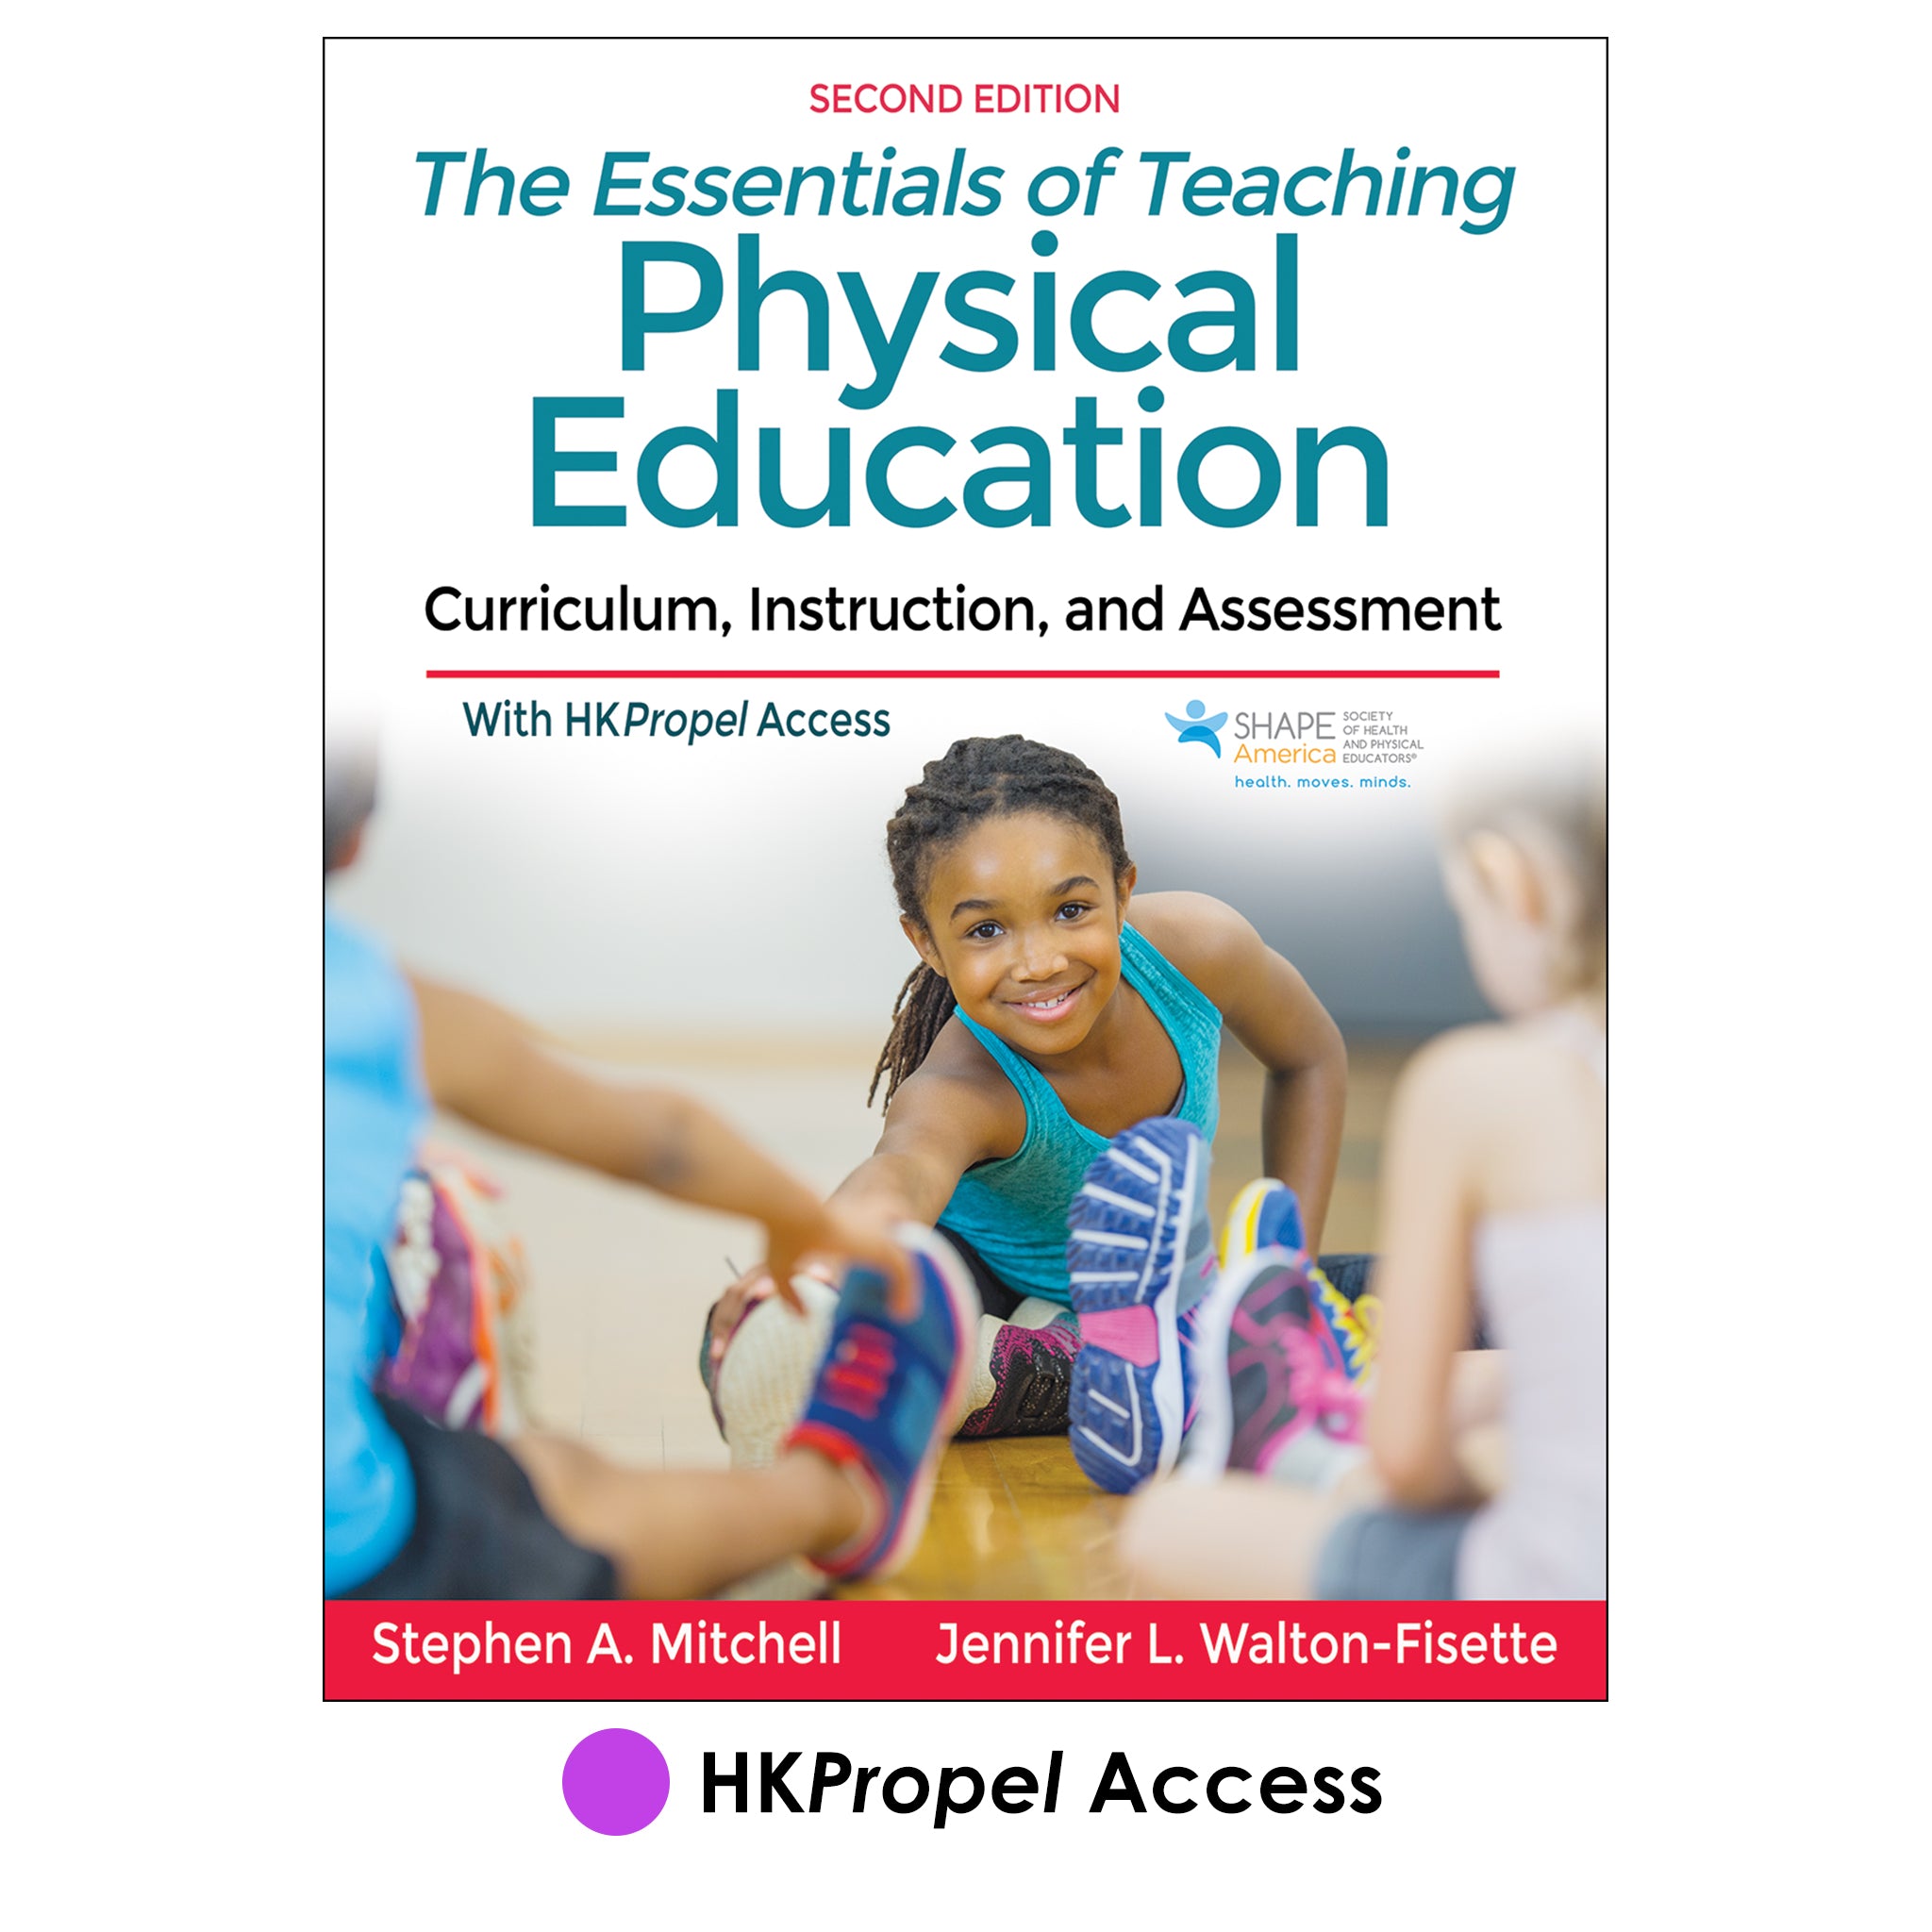 The Essentials of Teaching Physical Education 2nd Edition HKPropel Access